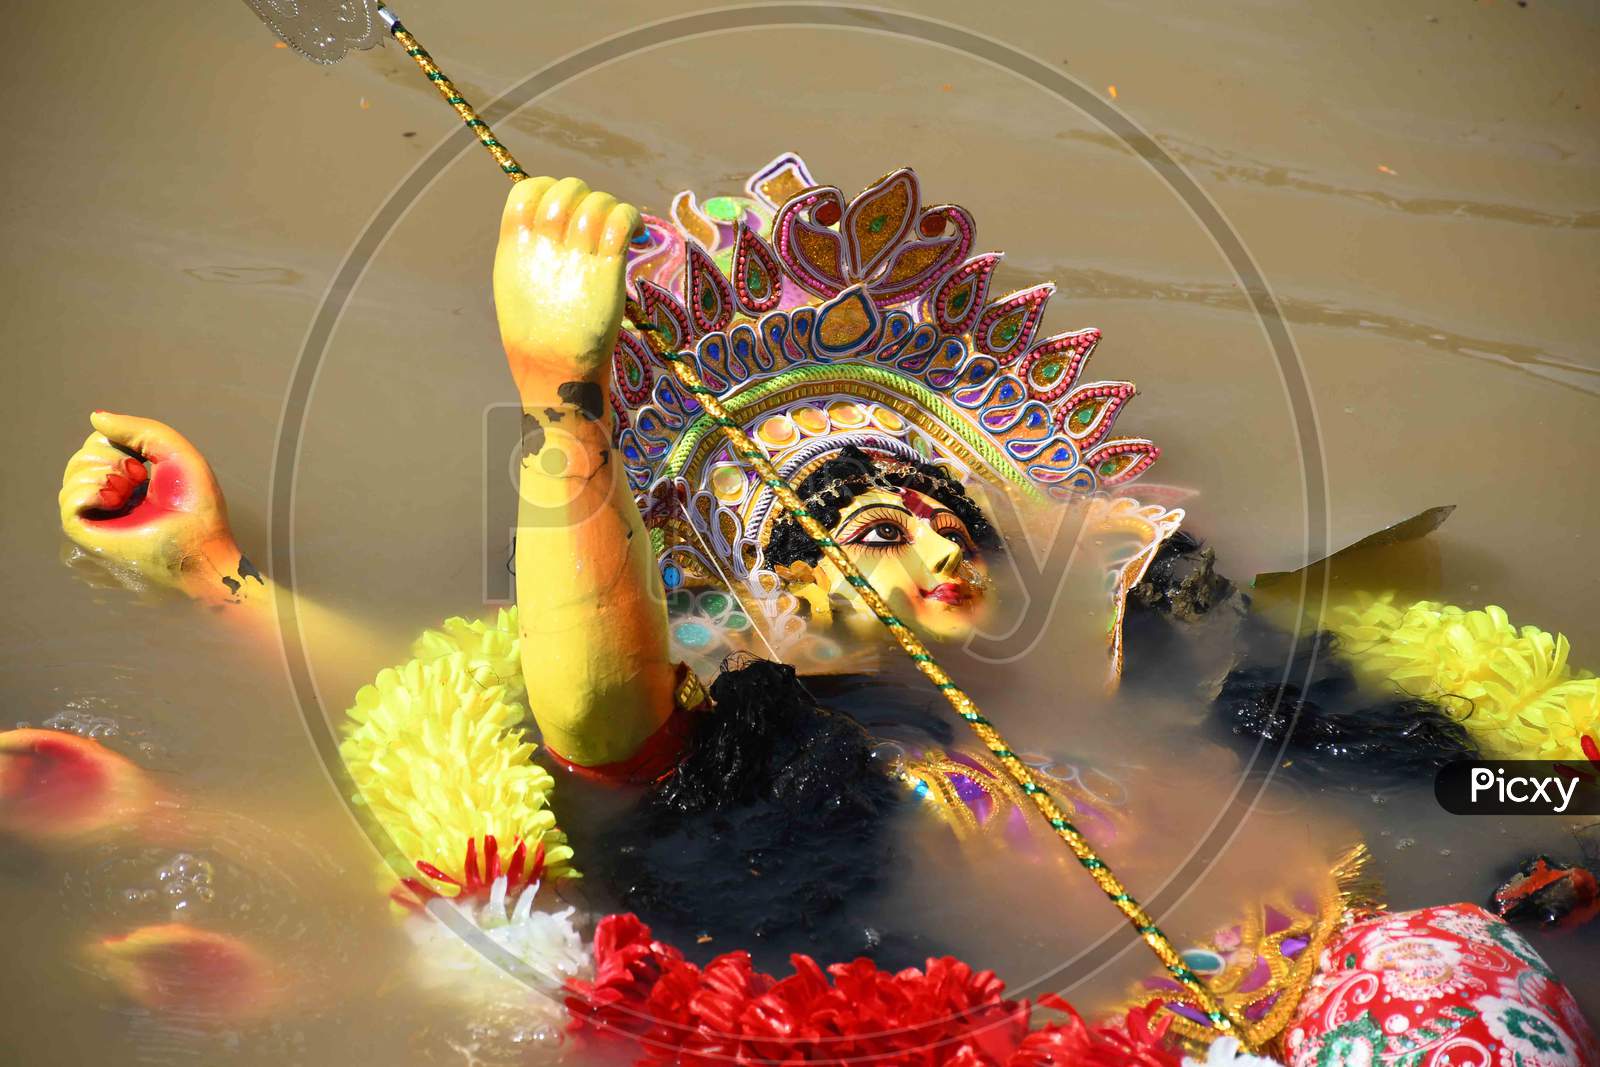 Hindu goddess Durga into the brahmaputra  river during the immersion ceremony of Durga Puja in Guwahati on oct 26,2020